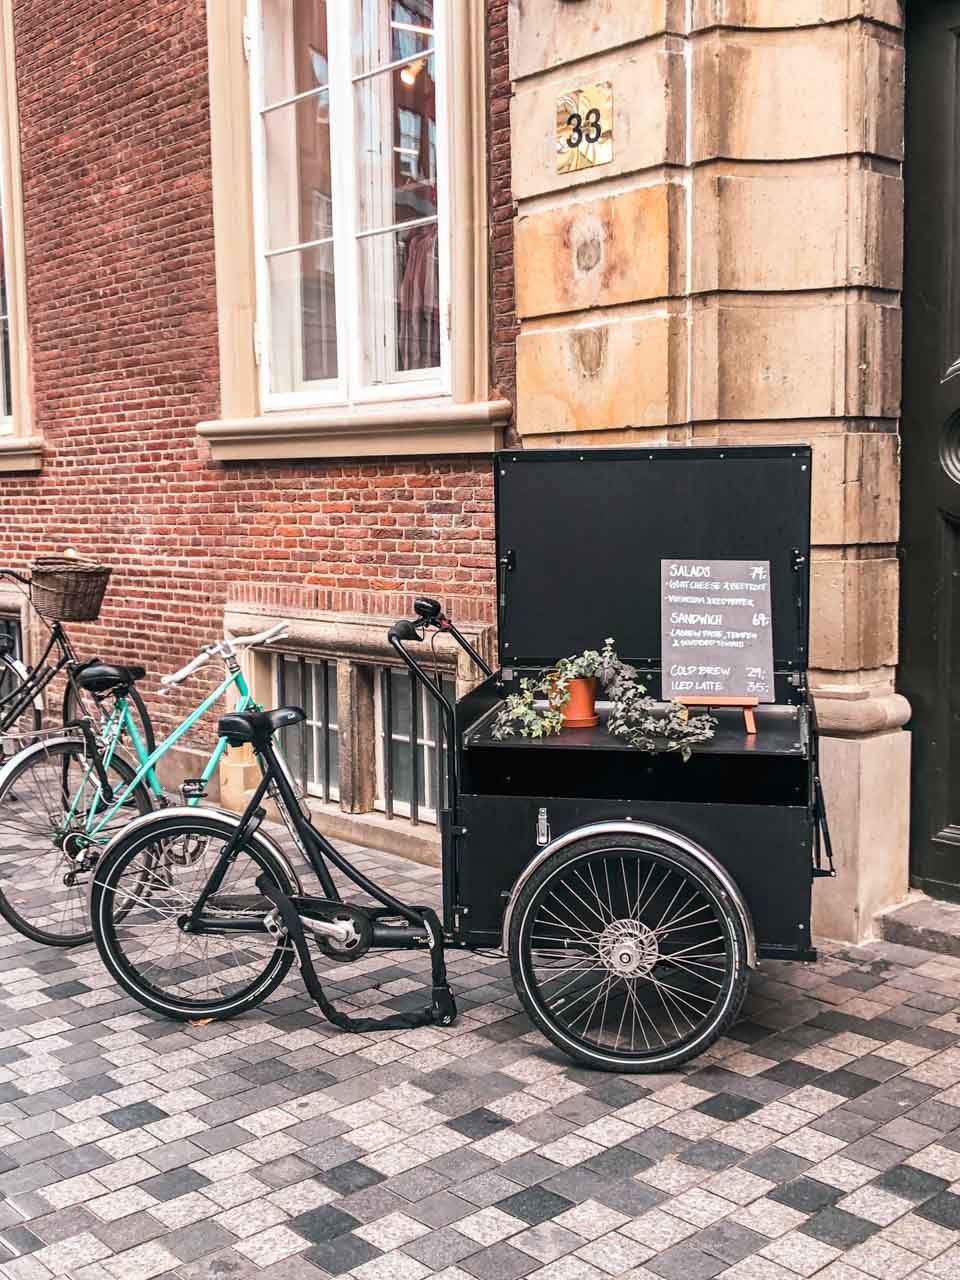 A decorative bike used to sell coffee on the streets of Copenhagen, Denmark